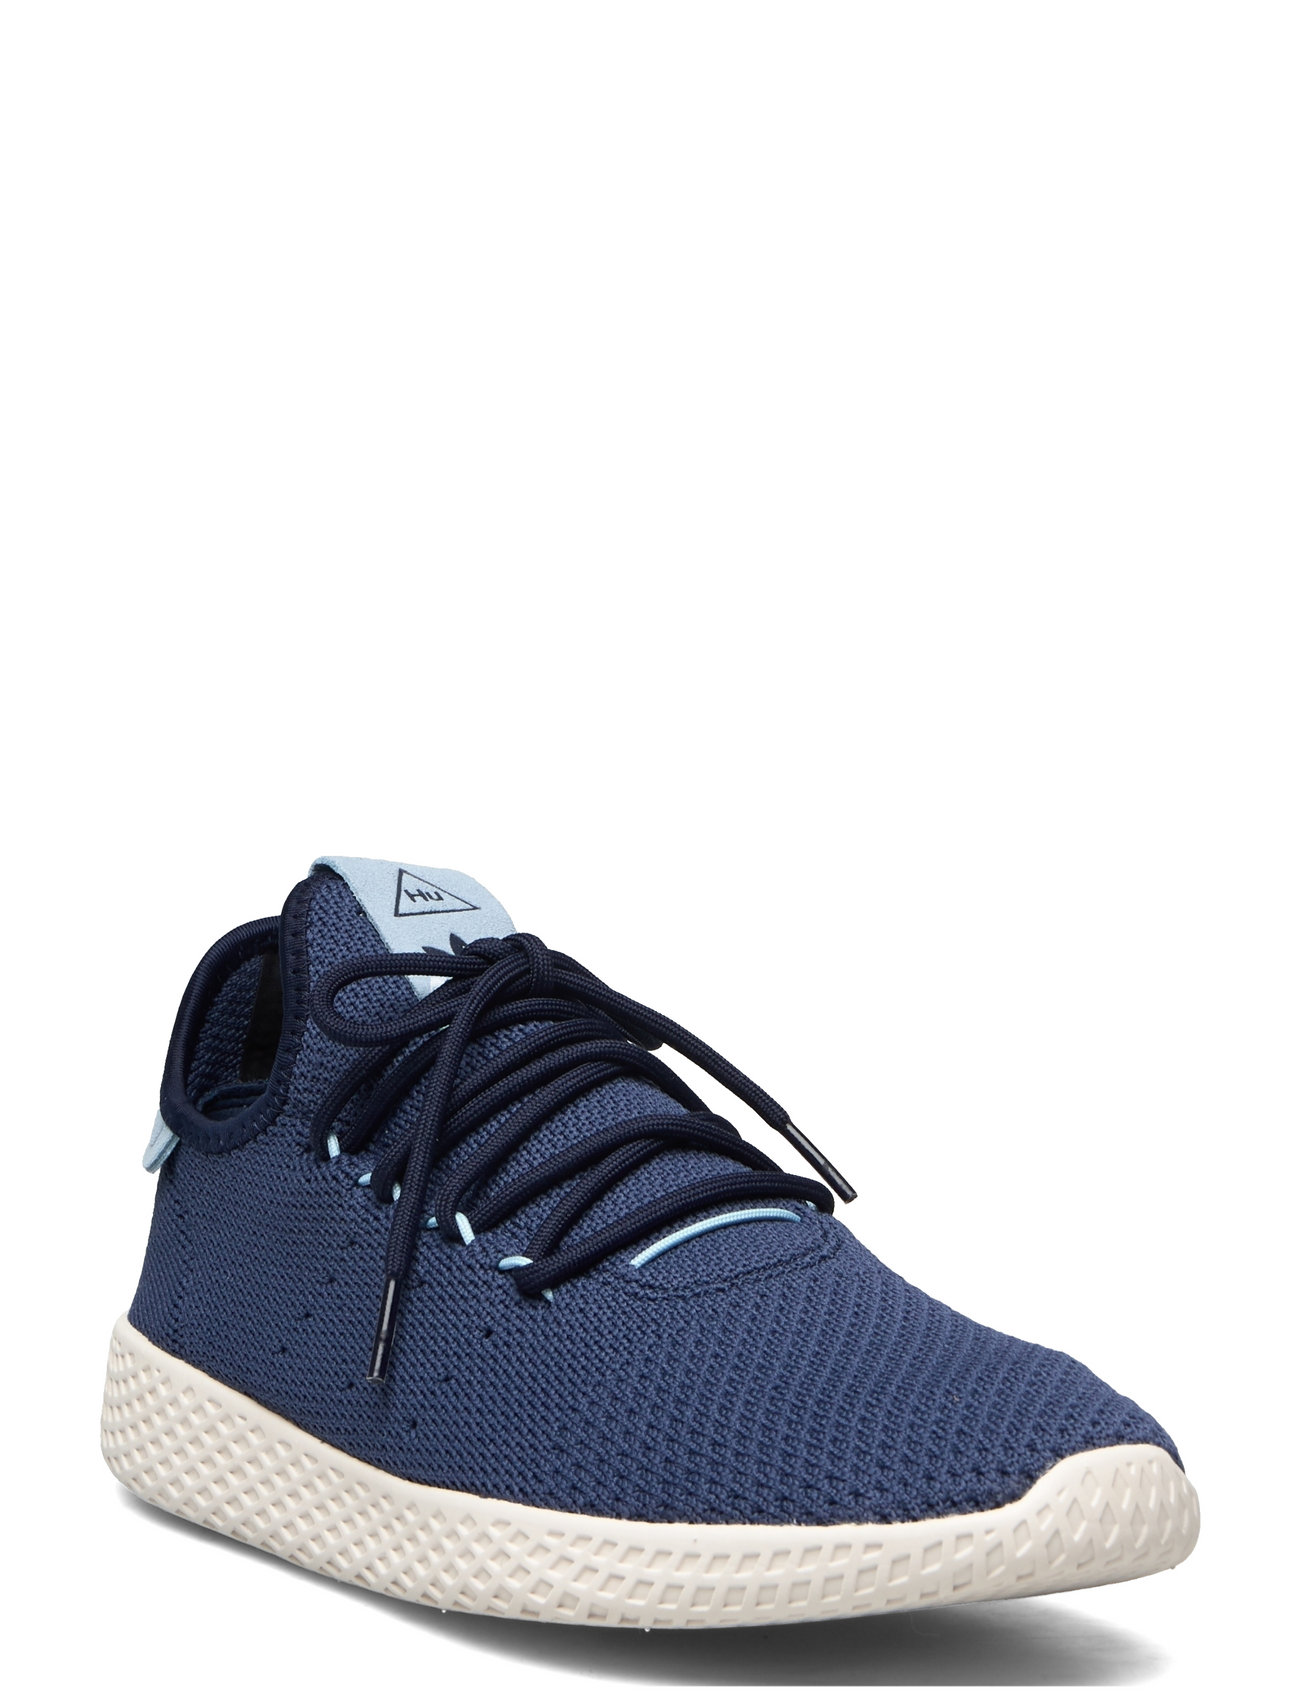 adidas Performance Pharrell Williams Shoes - Lave sneakers Boozt.com